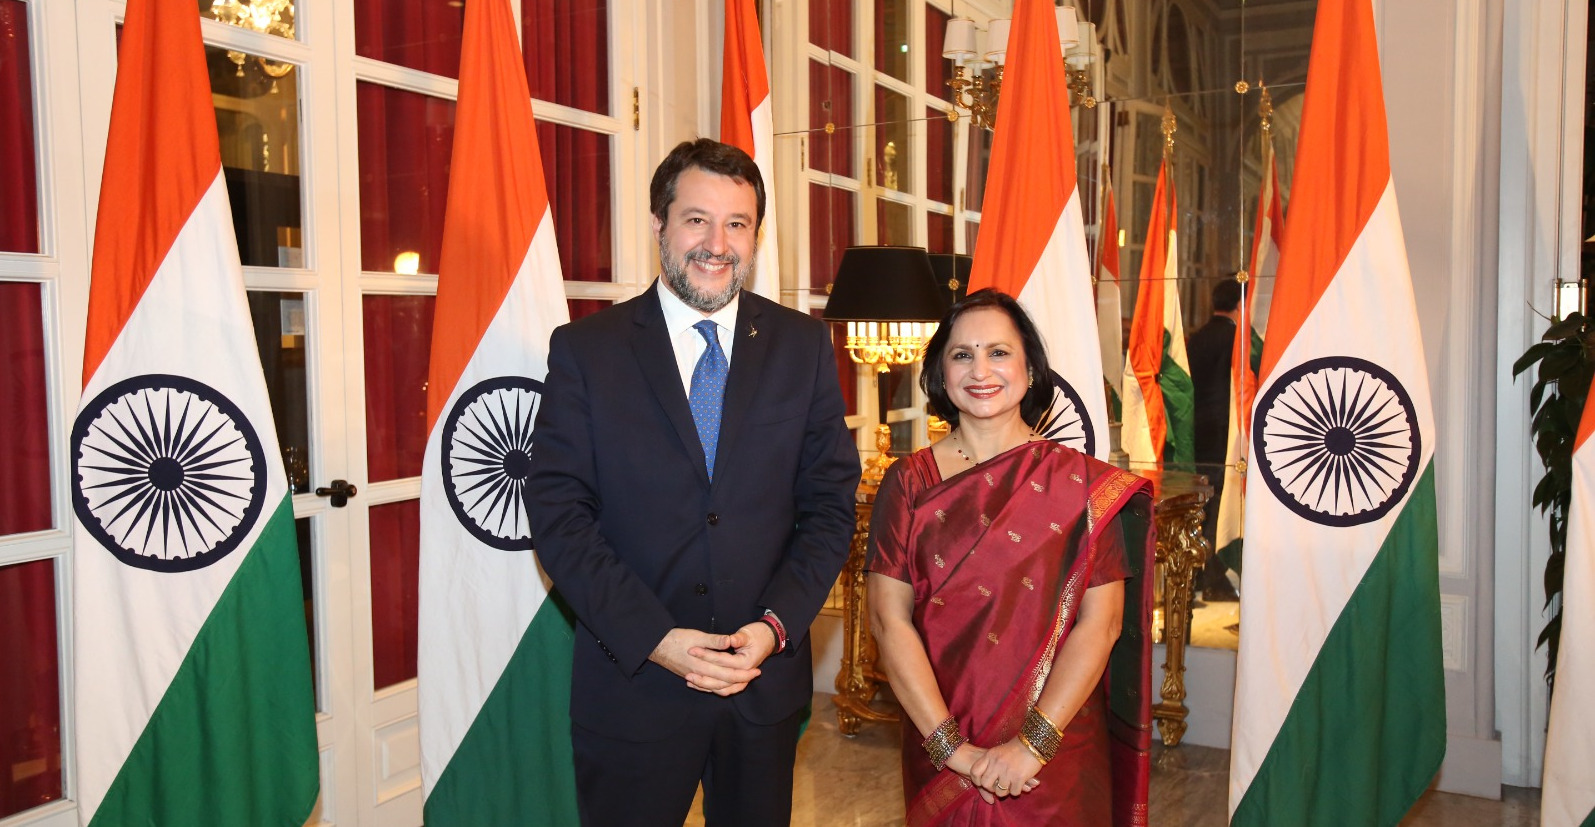 Hon'ble Deputy PM of Italy & Minister of Infrastructure and Transport Matteo Salvini at Gala Reception on the occasion of Republic Day of India